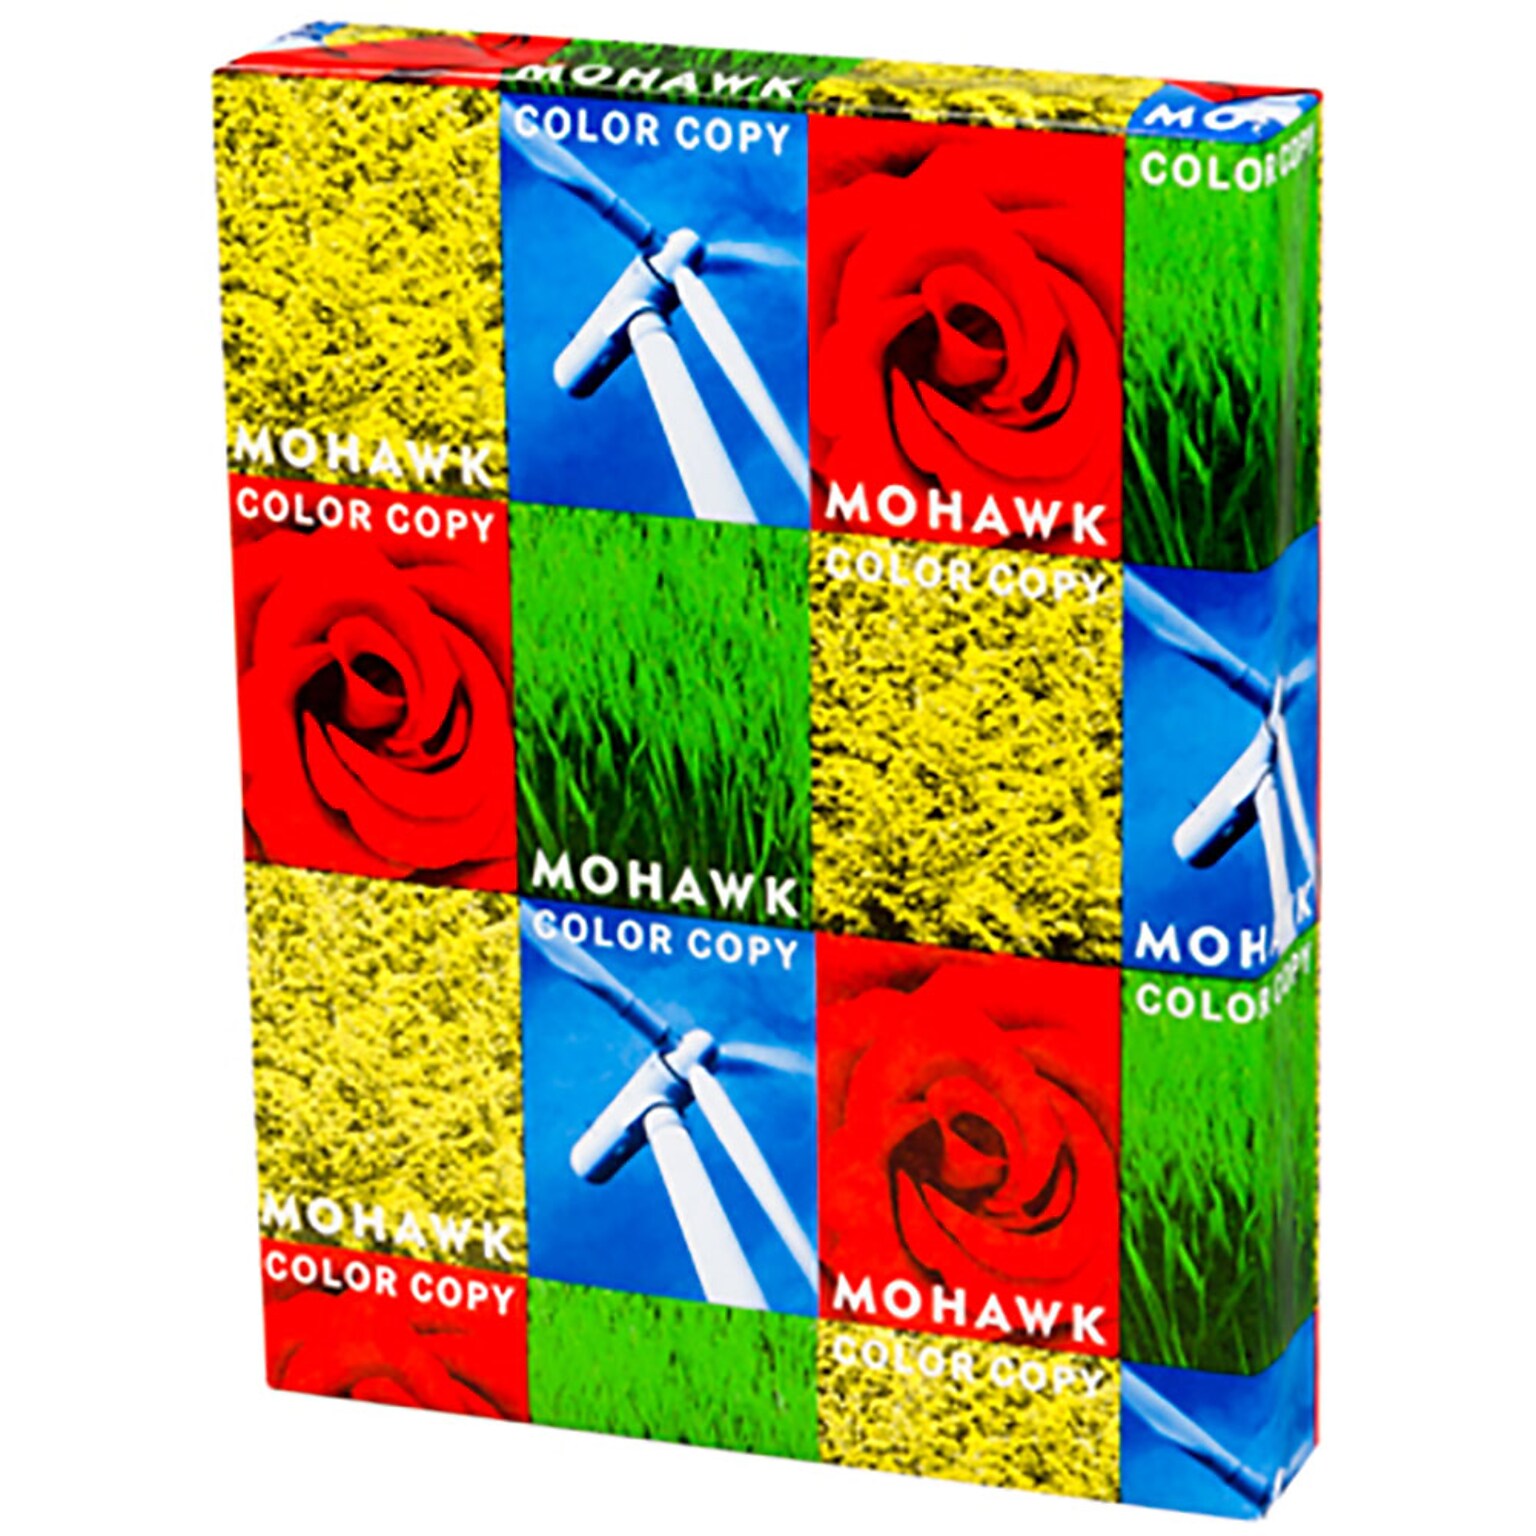 Mohawk® Color Copy 98 8.5 x 11 Smooth Imaging Paper, 28 lbs., 95 Brightness, 500 Sheets/Ream (54-301)